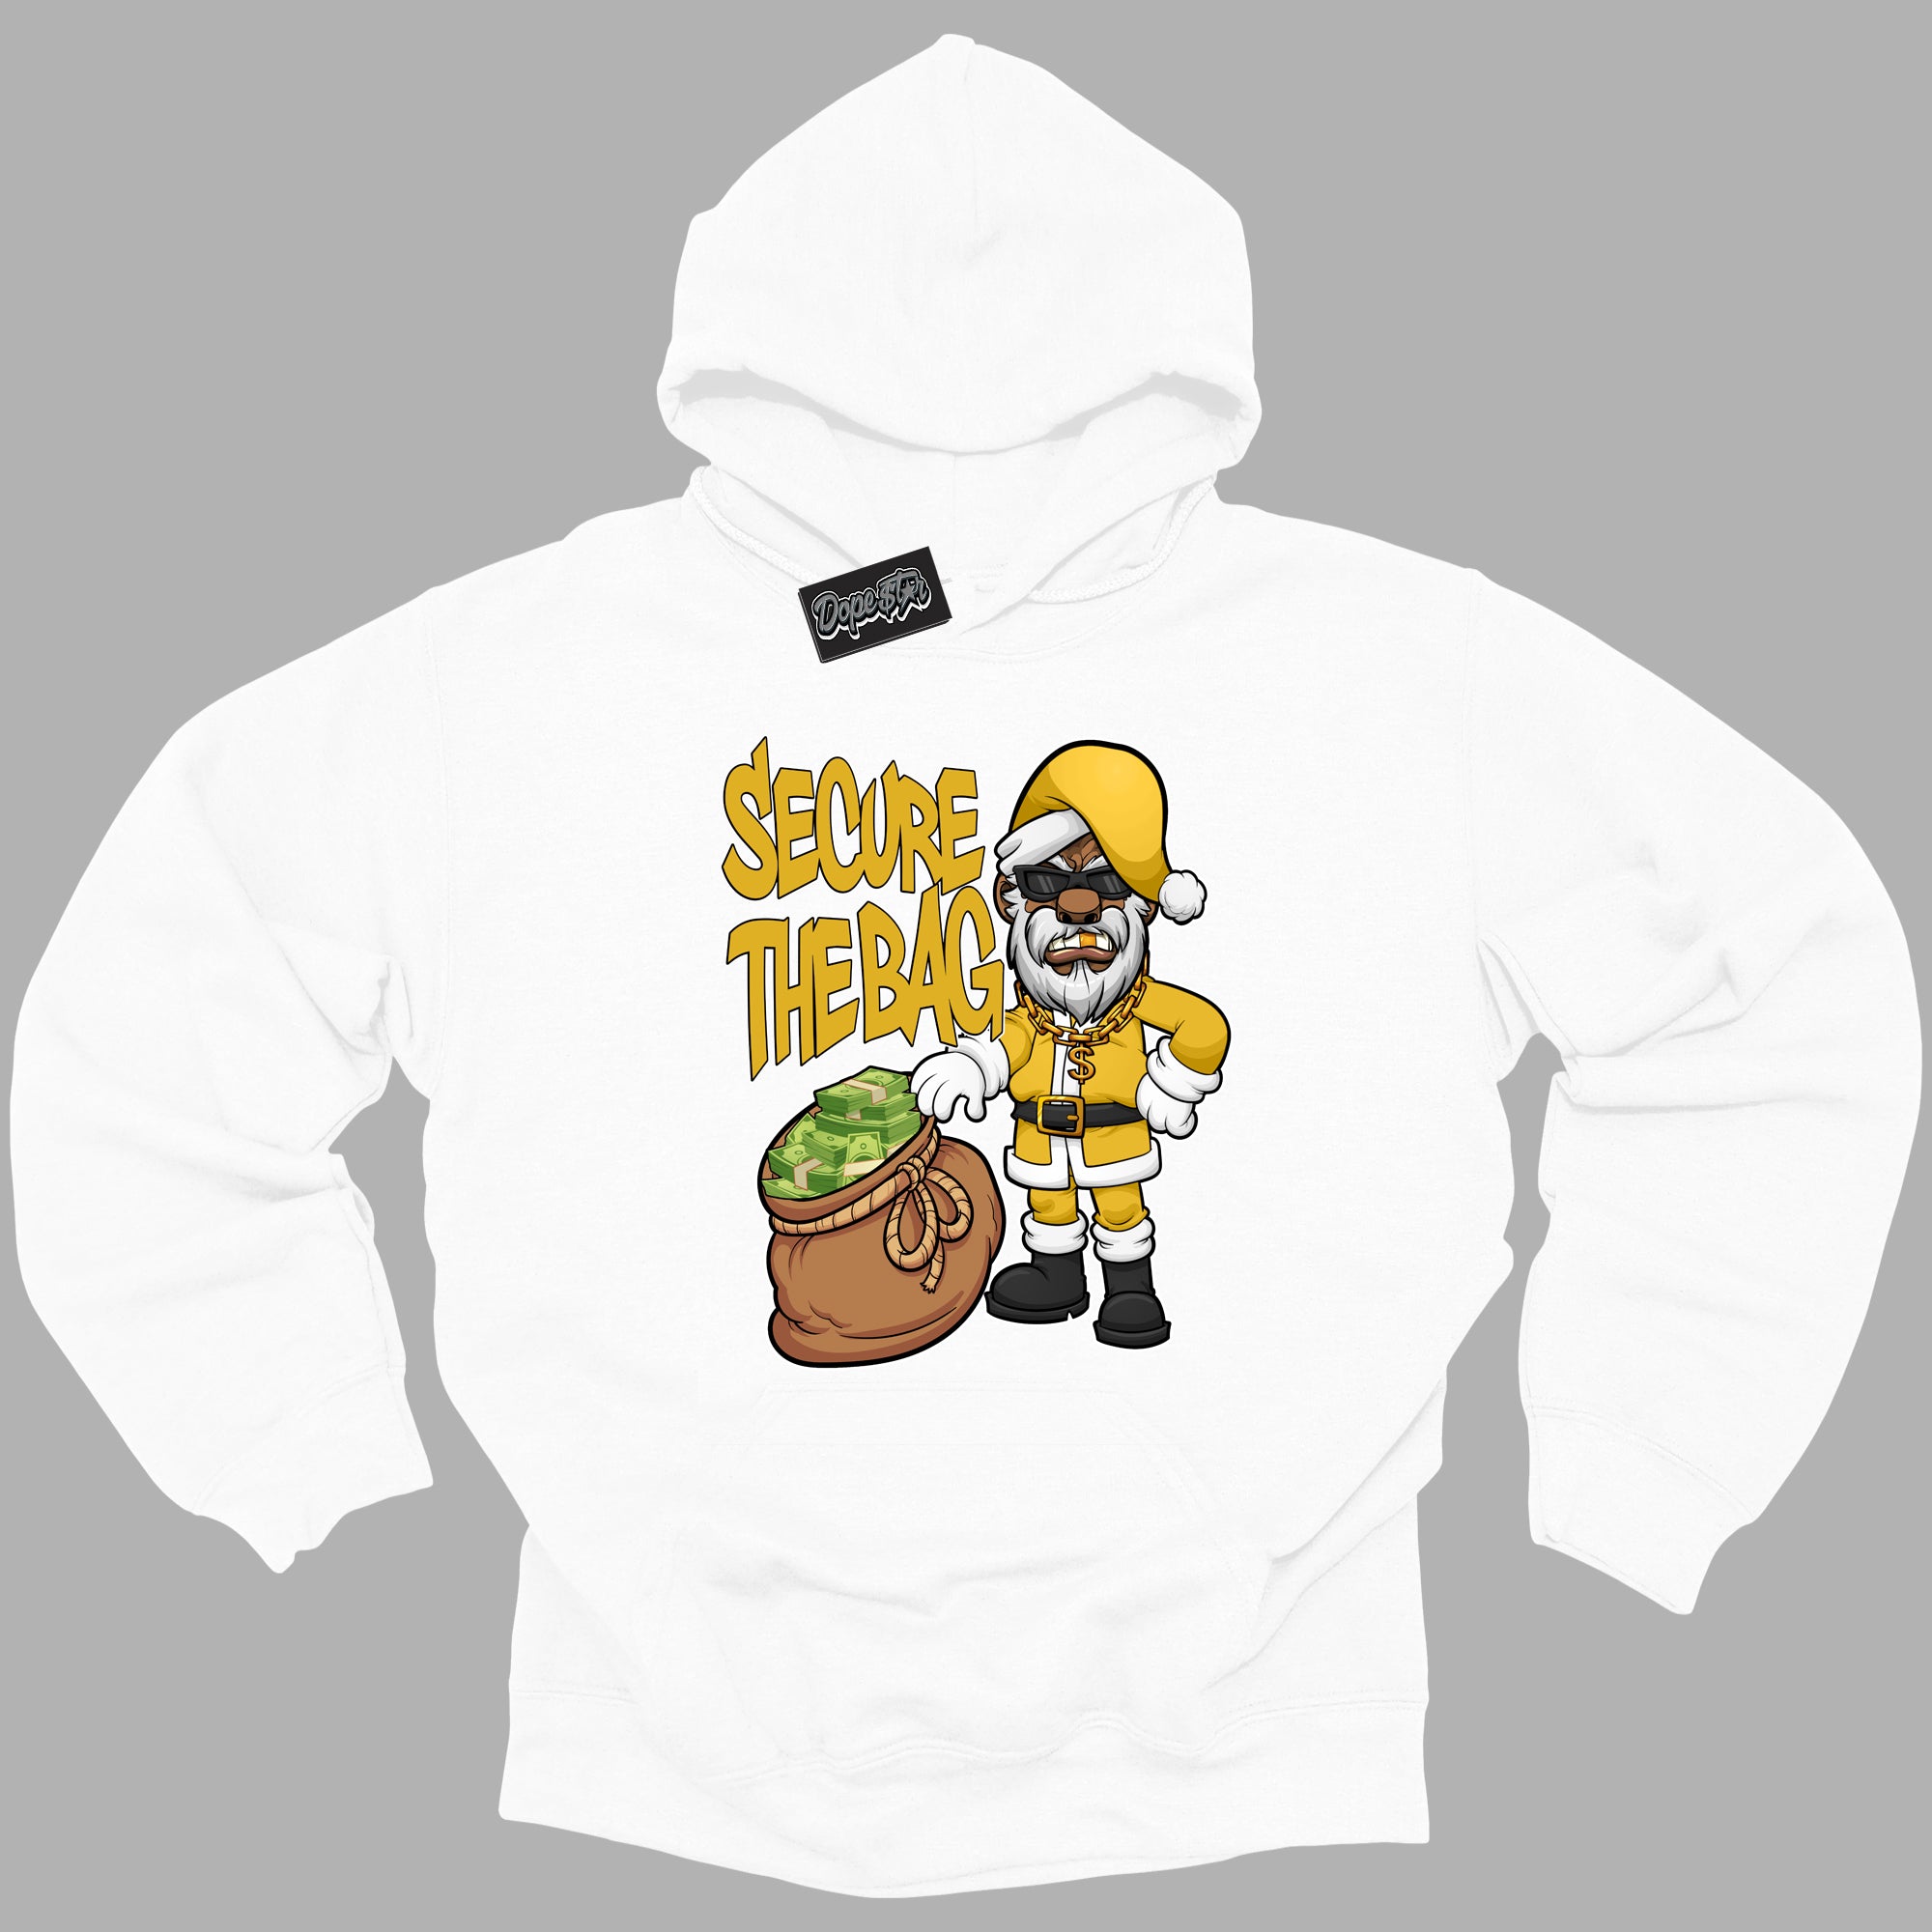 Cool White Hoodie with “ Secure The Bag Santa ”  design that Perfectly Matches Yellow Ochre 6s Sneakers.